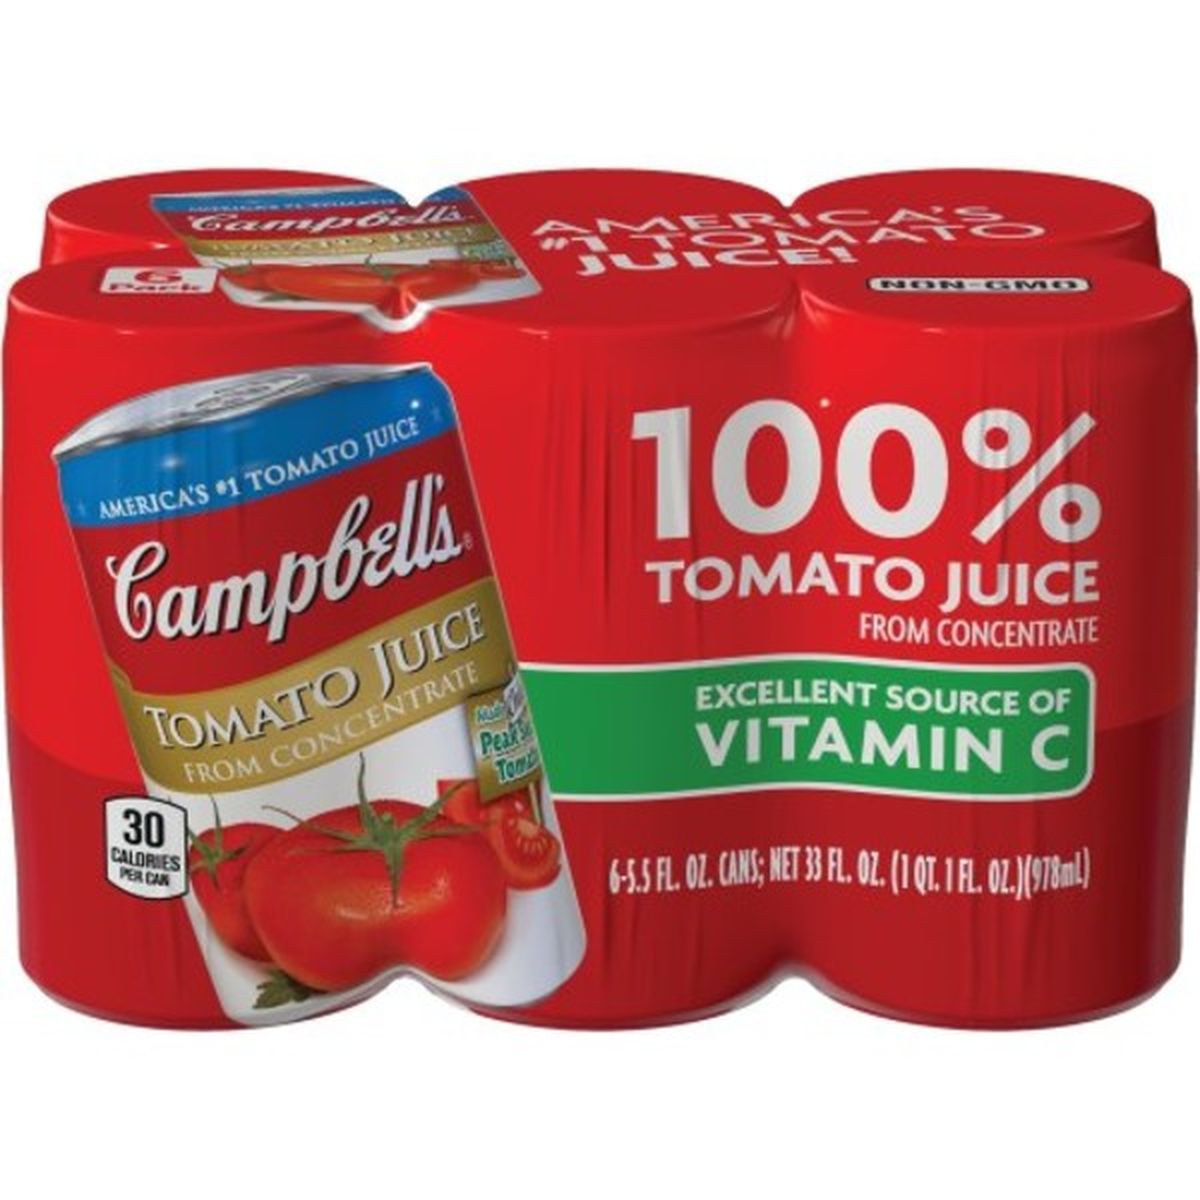 Calories in Campbell's 100% Tomato Juice Tomato Juice